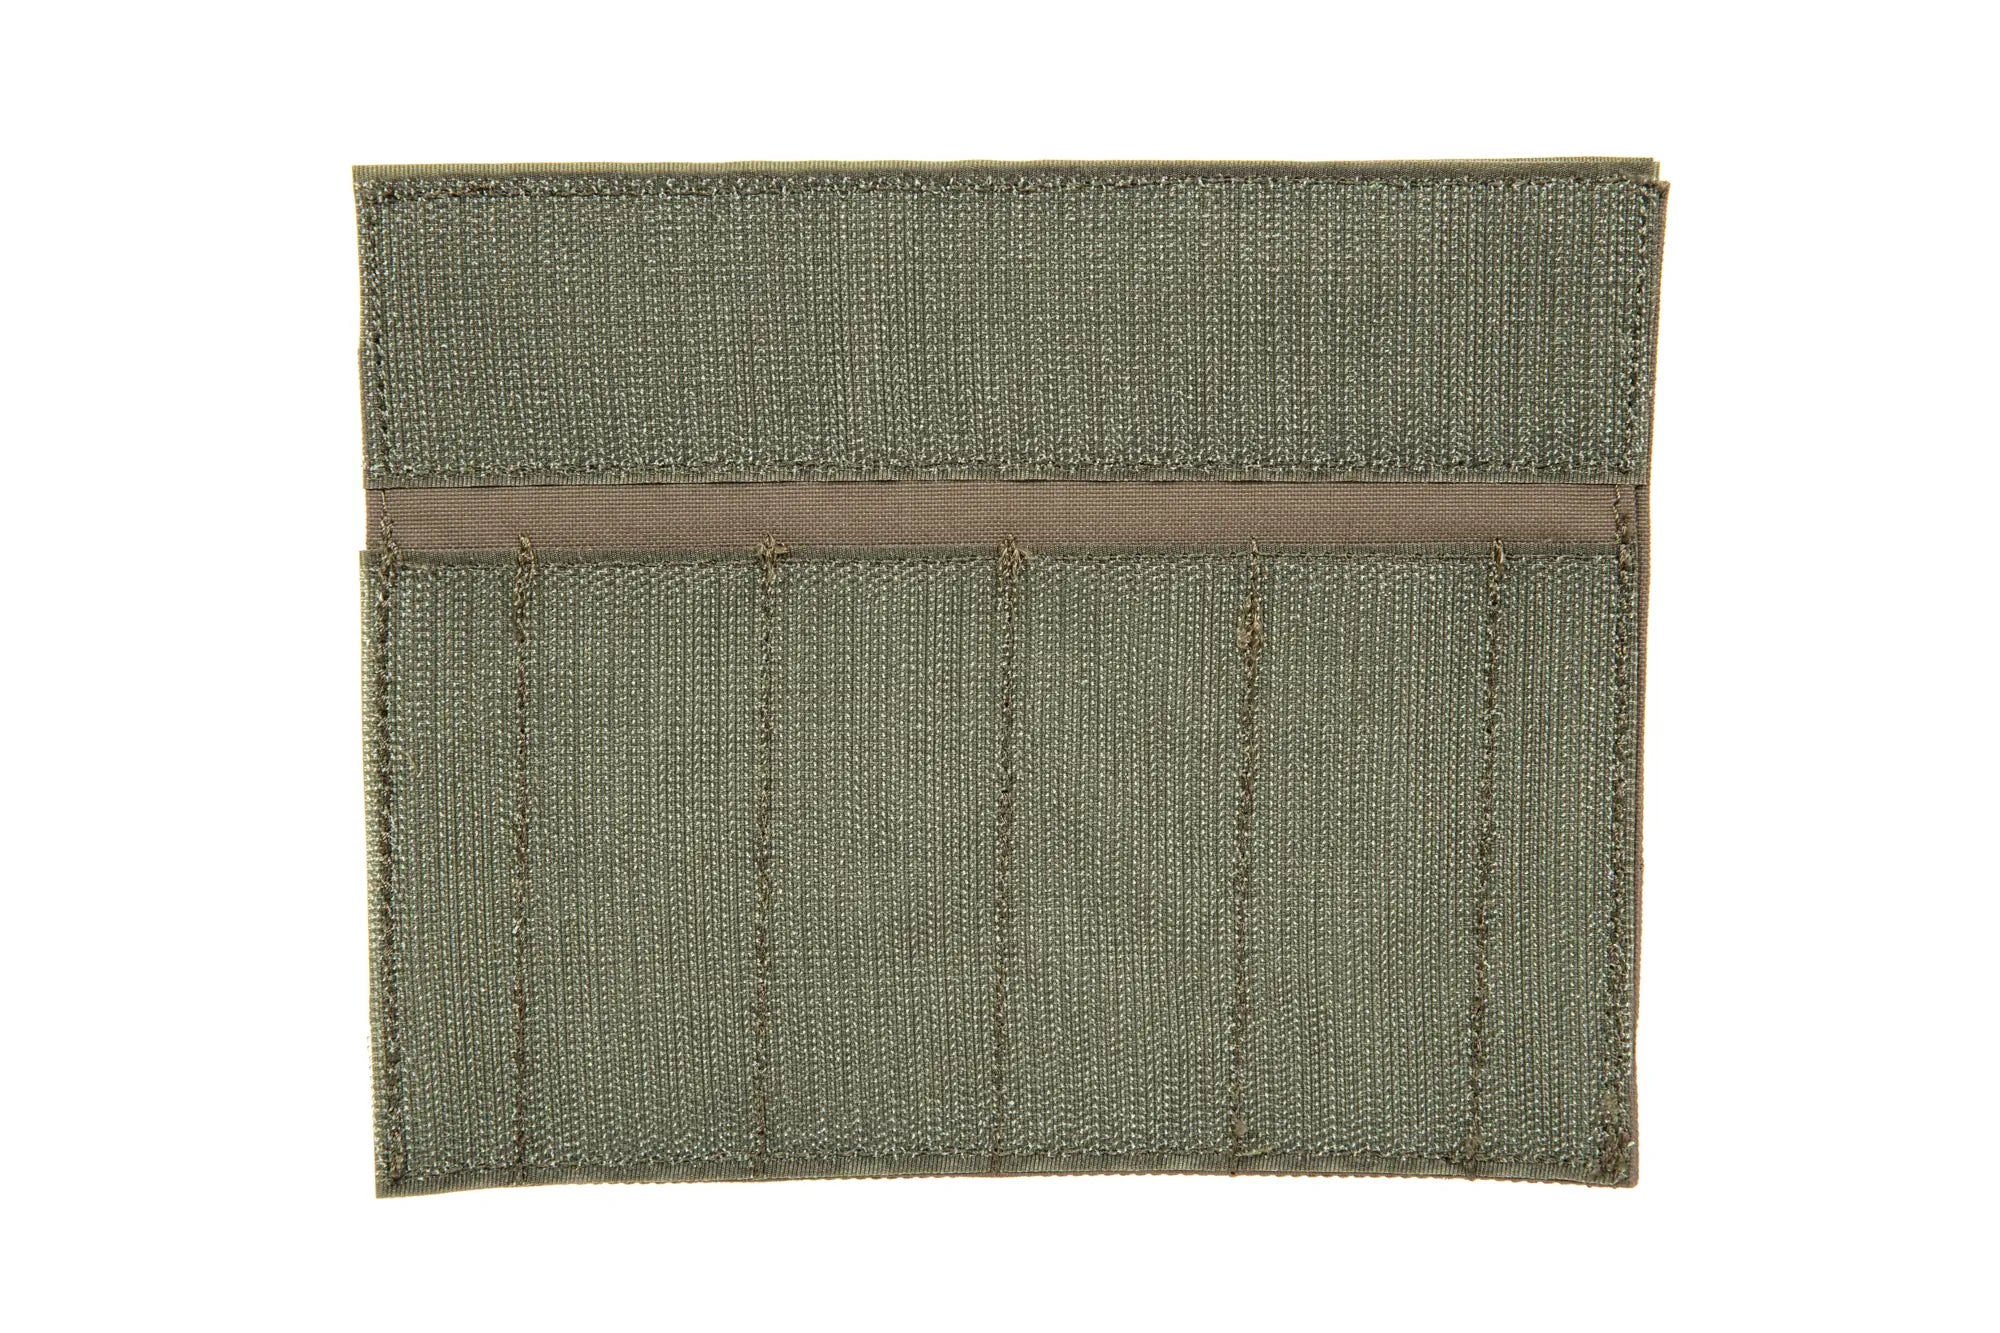 Molle panel for Wosport Ranger Green Chest Rig waistcoats